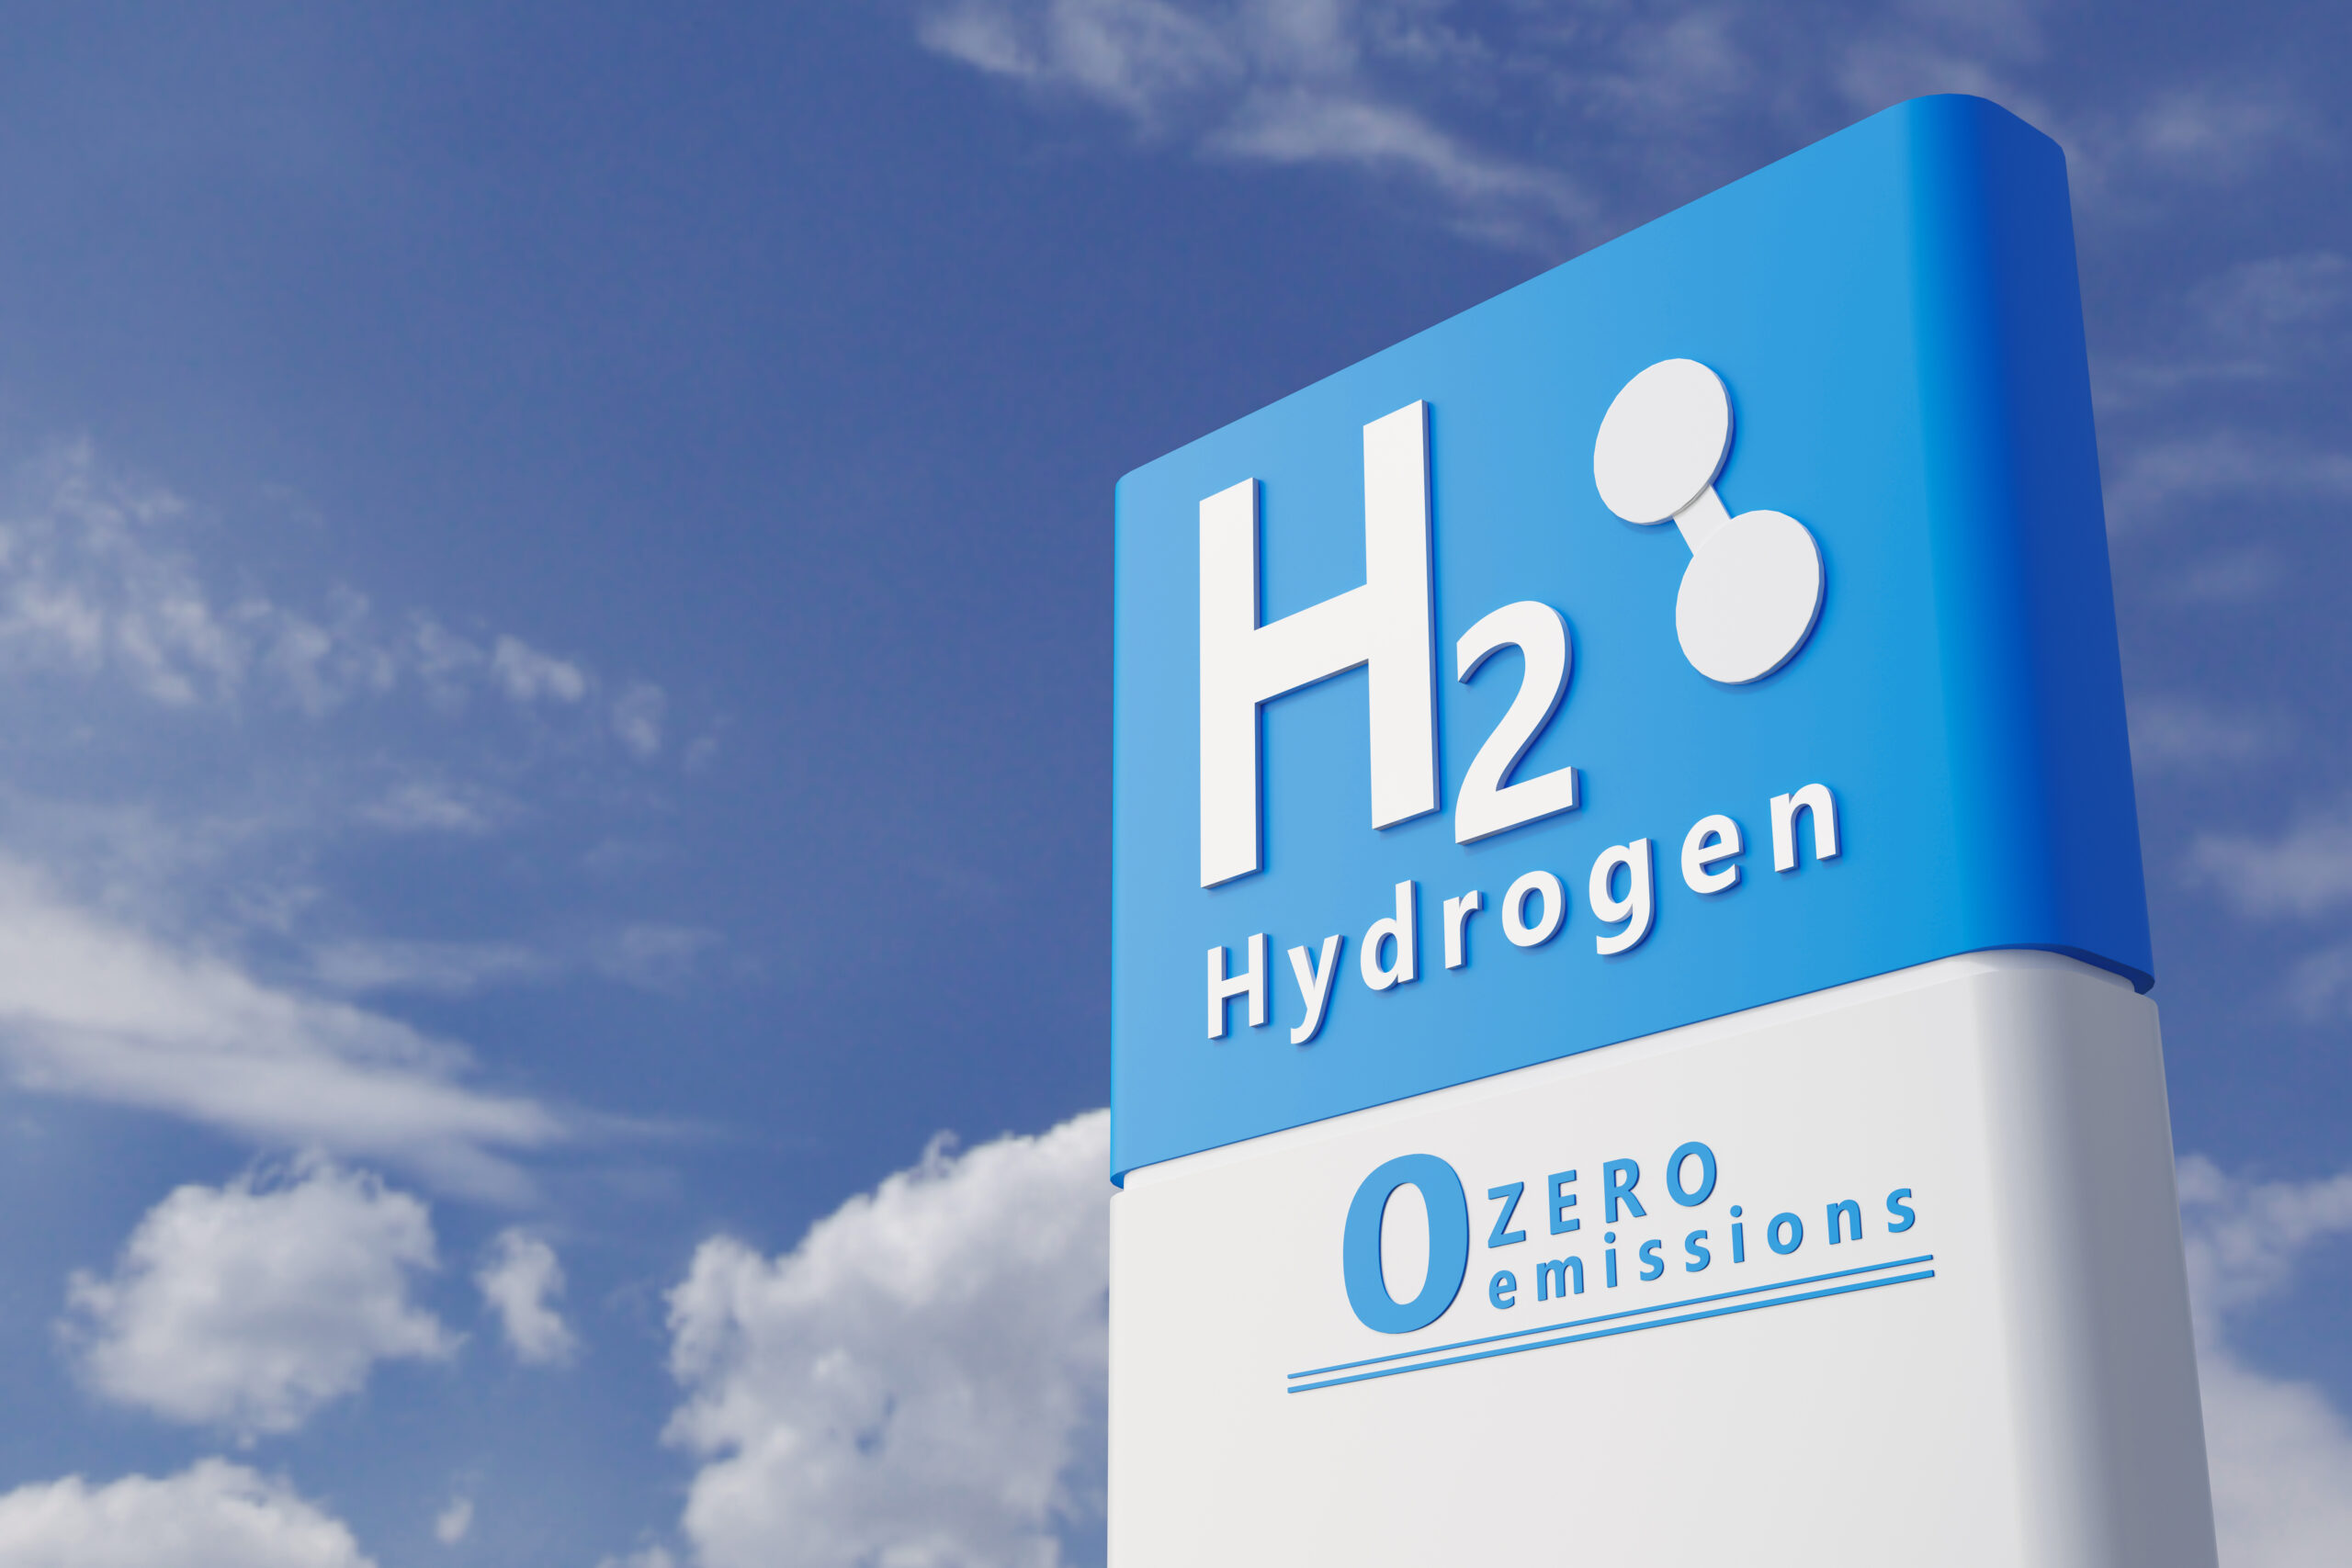 What’s new with hydrogen in transportation?